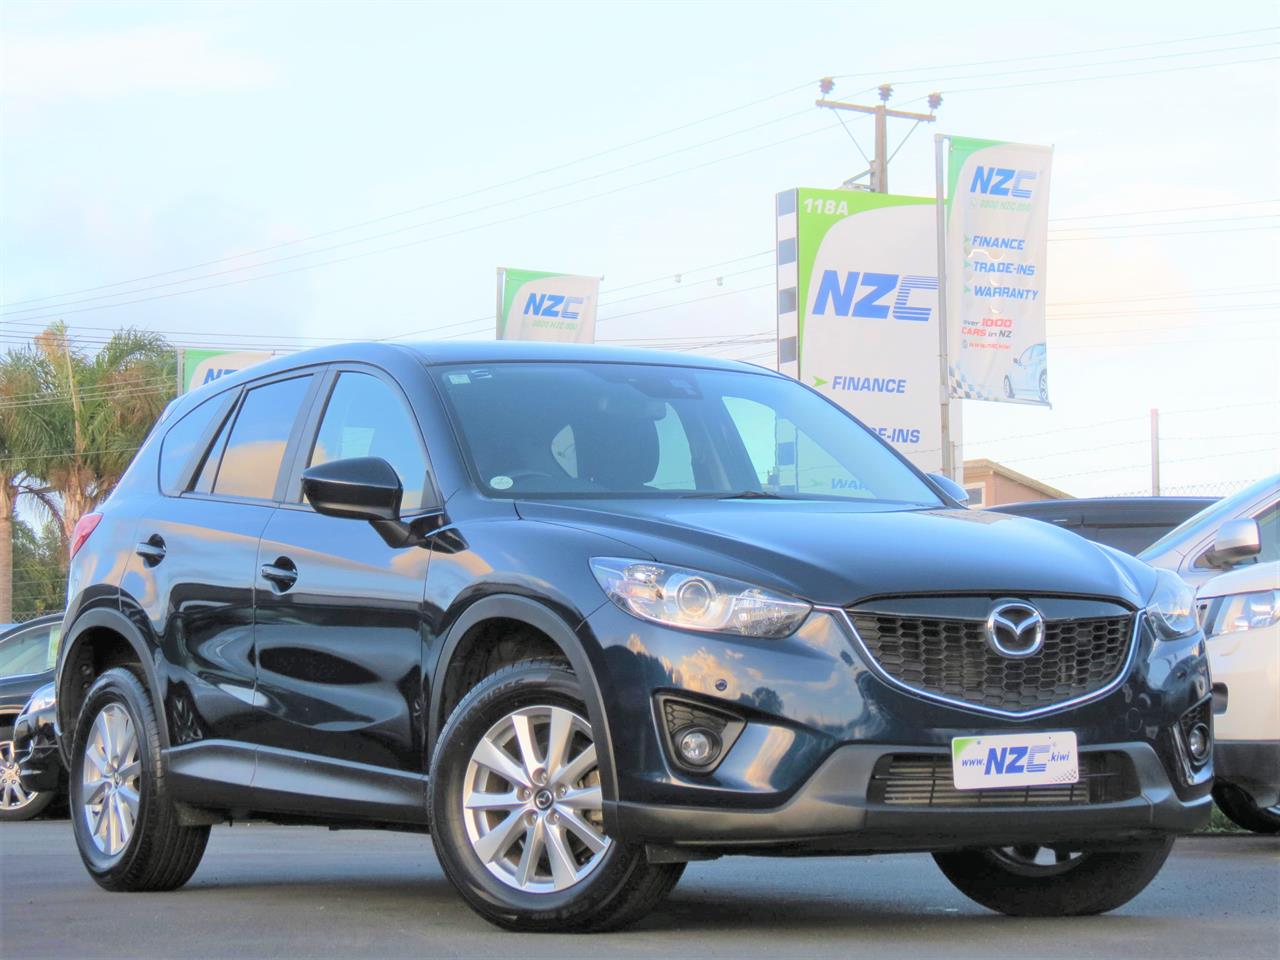 NZC 2014 Mazda CX-5 just arrived to Auckland